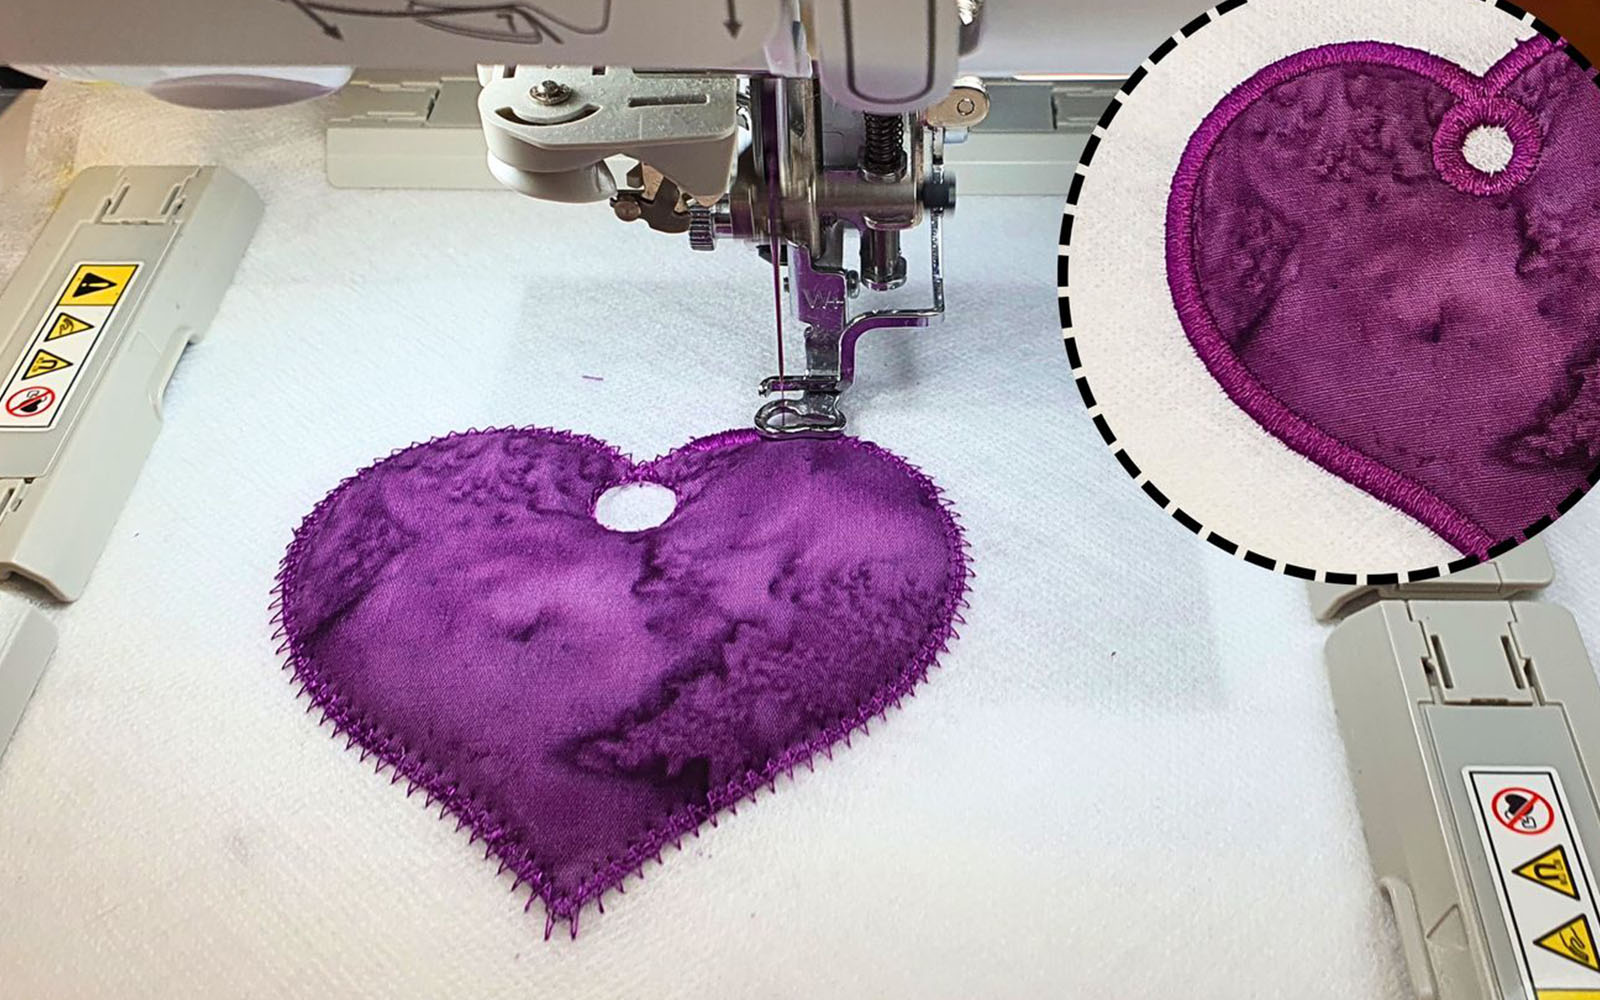 Purple heart embroidered on embroidery machine